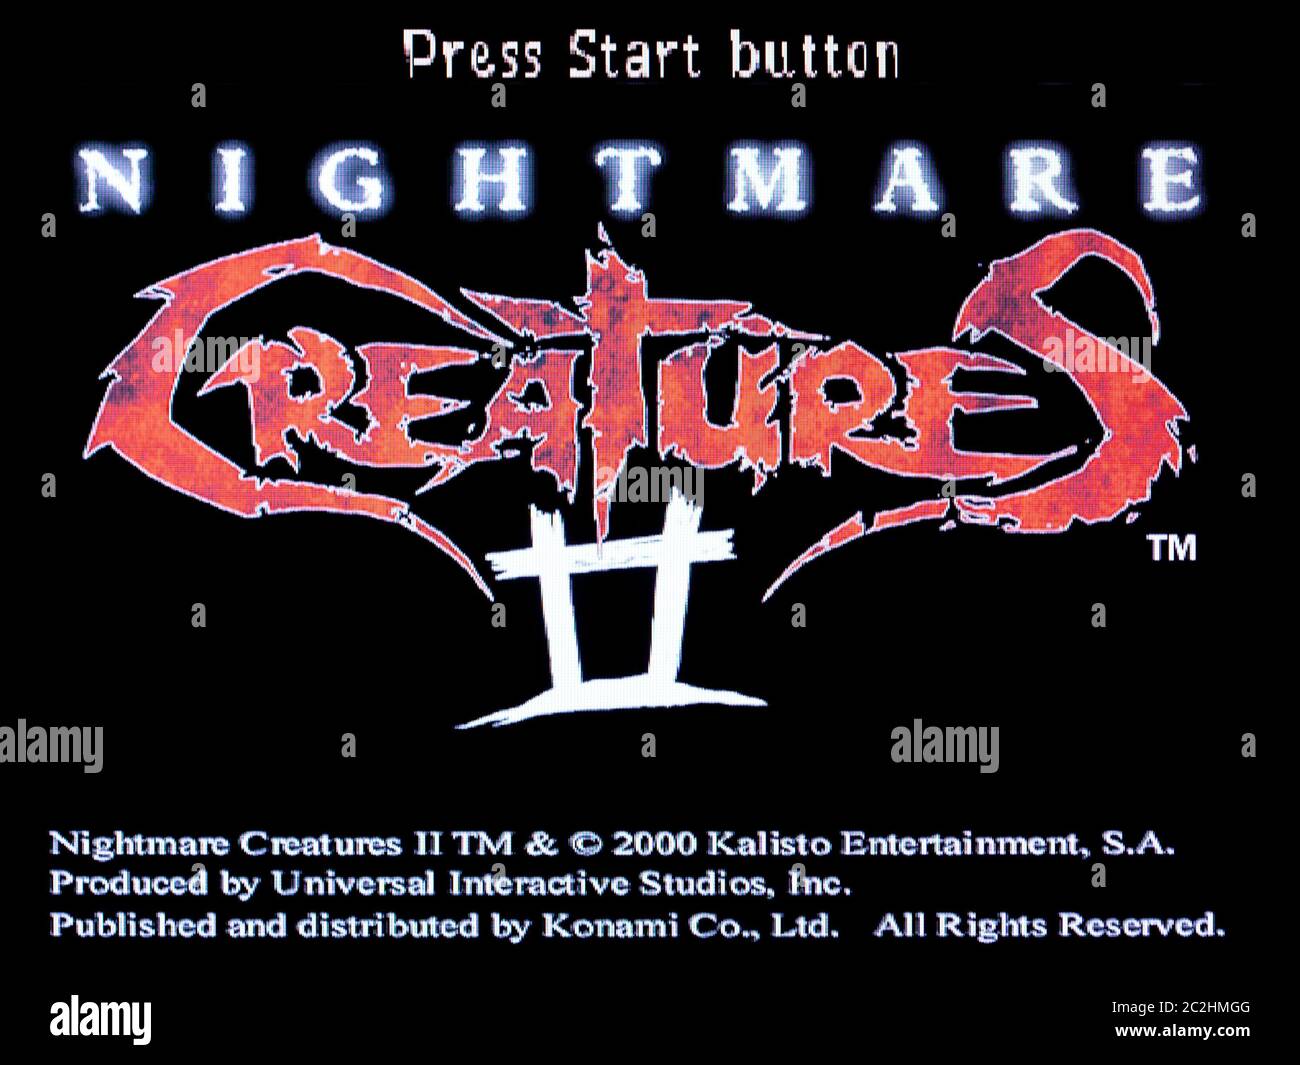 Nightmare Creatures II - Sega Dreamcast Videogame - Editorial use only Stock Photo